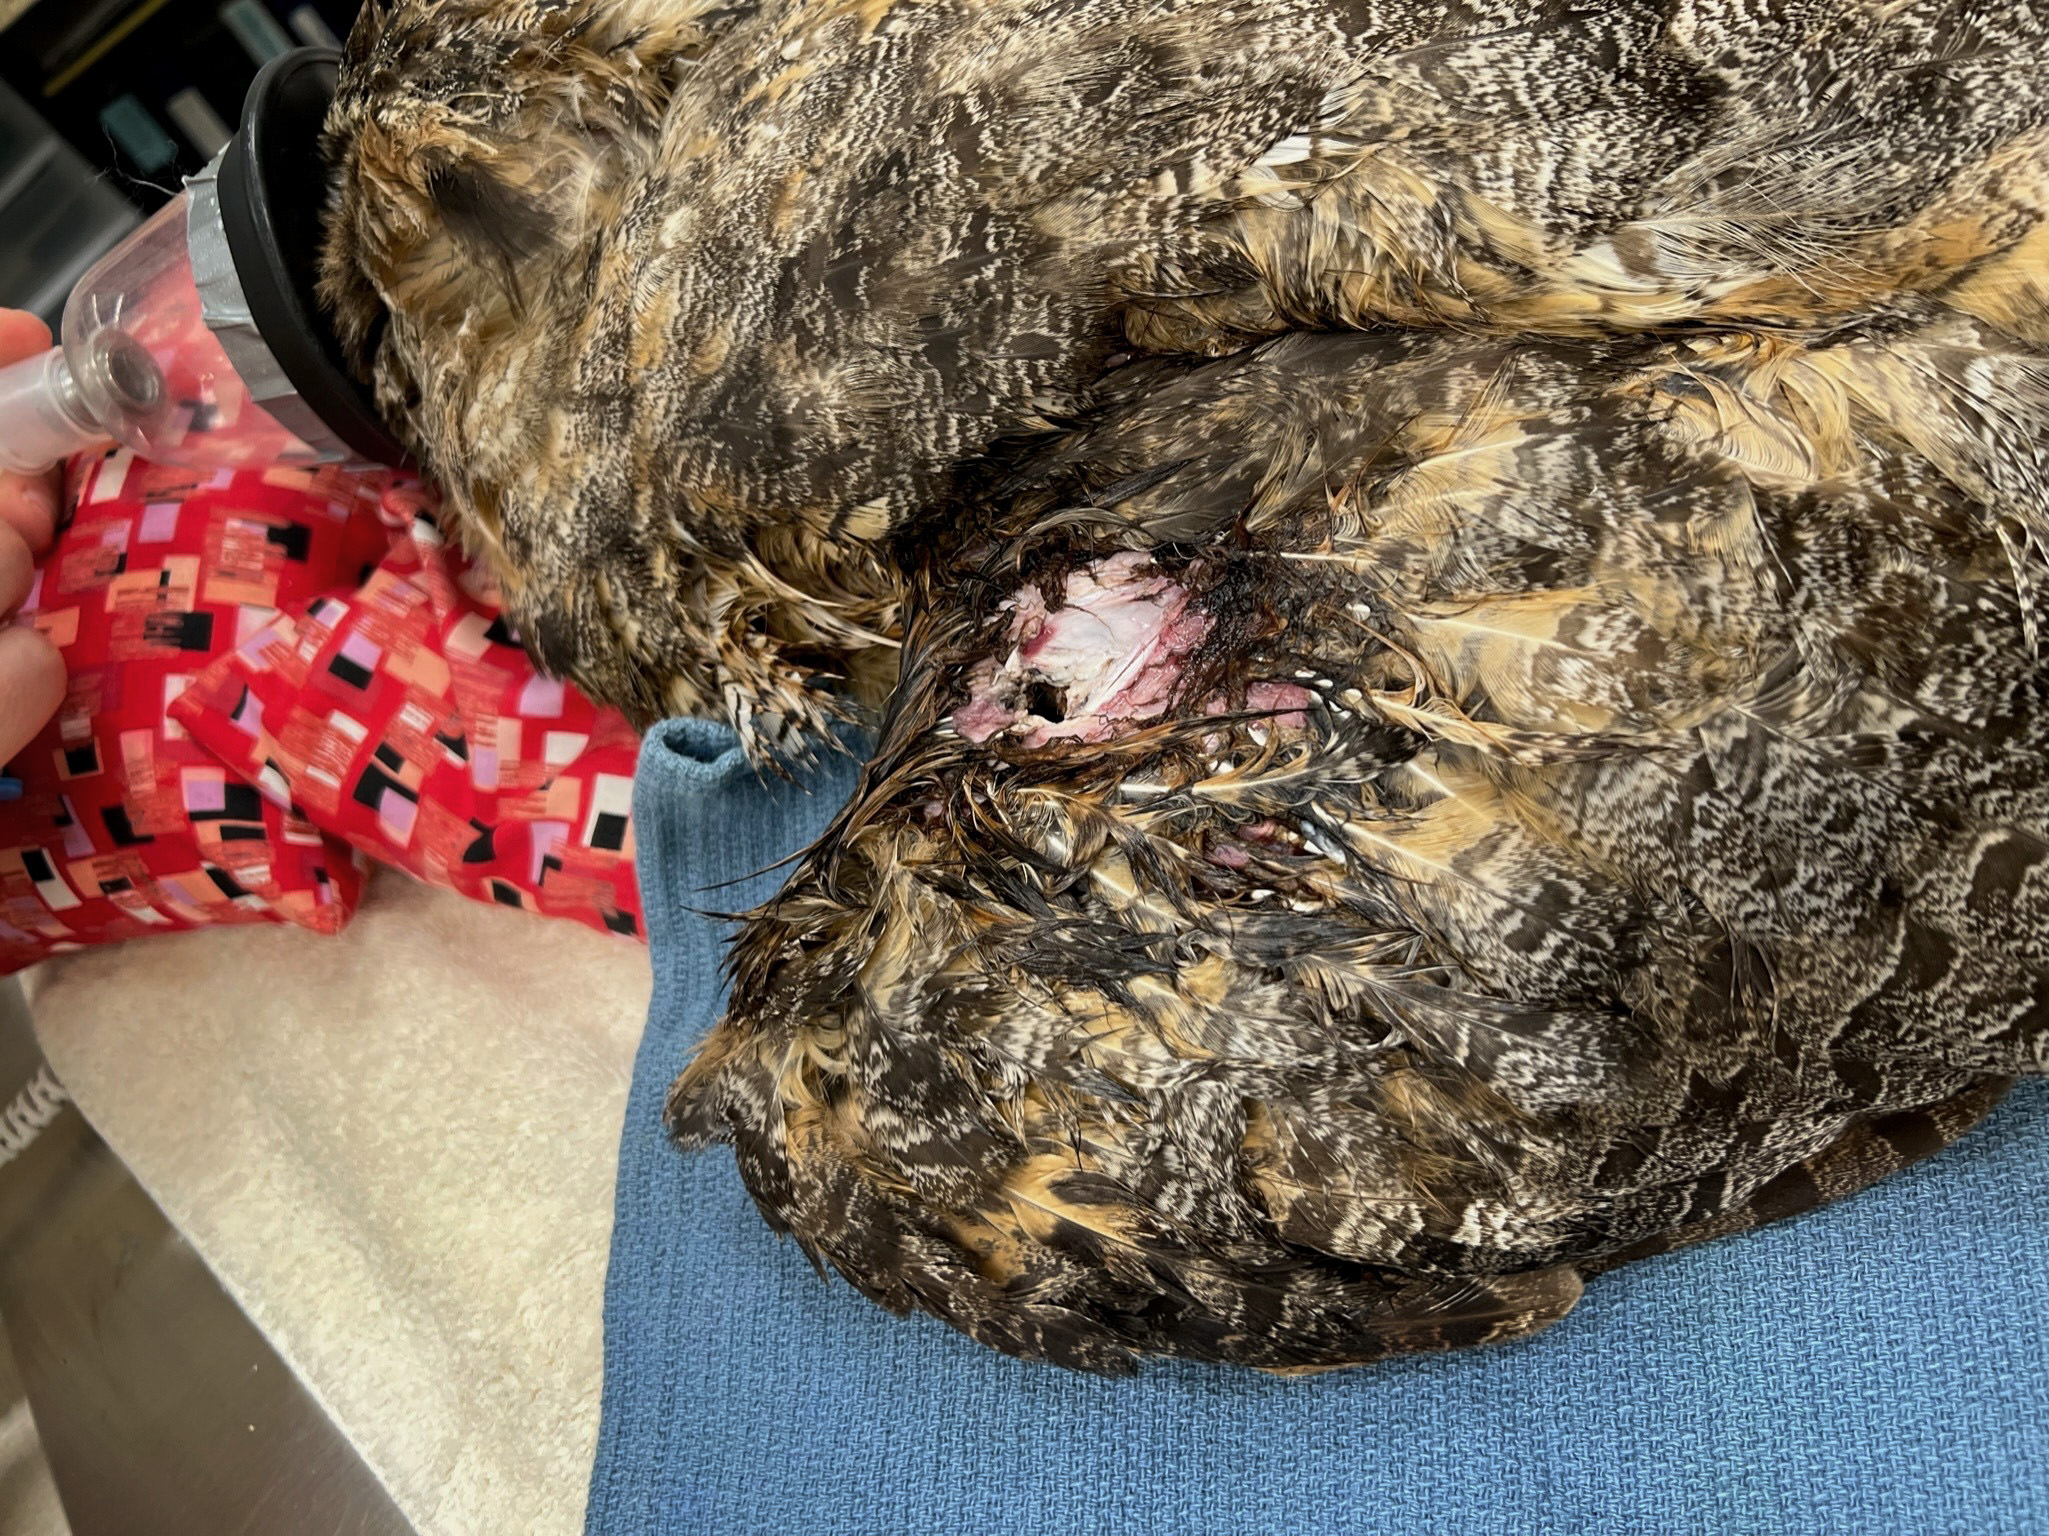 A great horned owl undergoes surgery at the von Arx Wildlife Hospital for wounds sustained after being entangled in a barbed wire fence.